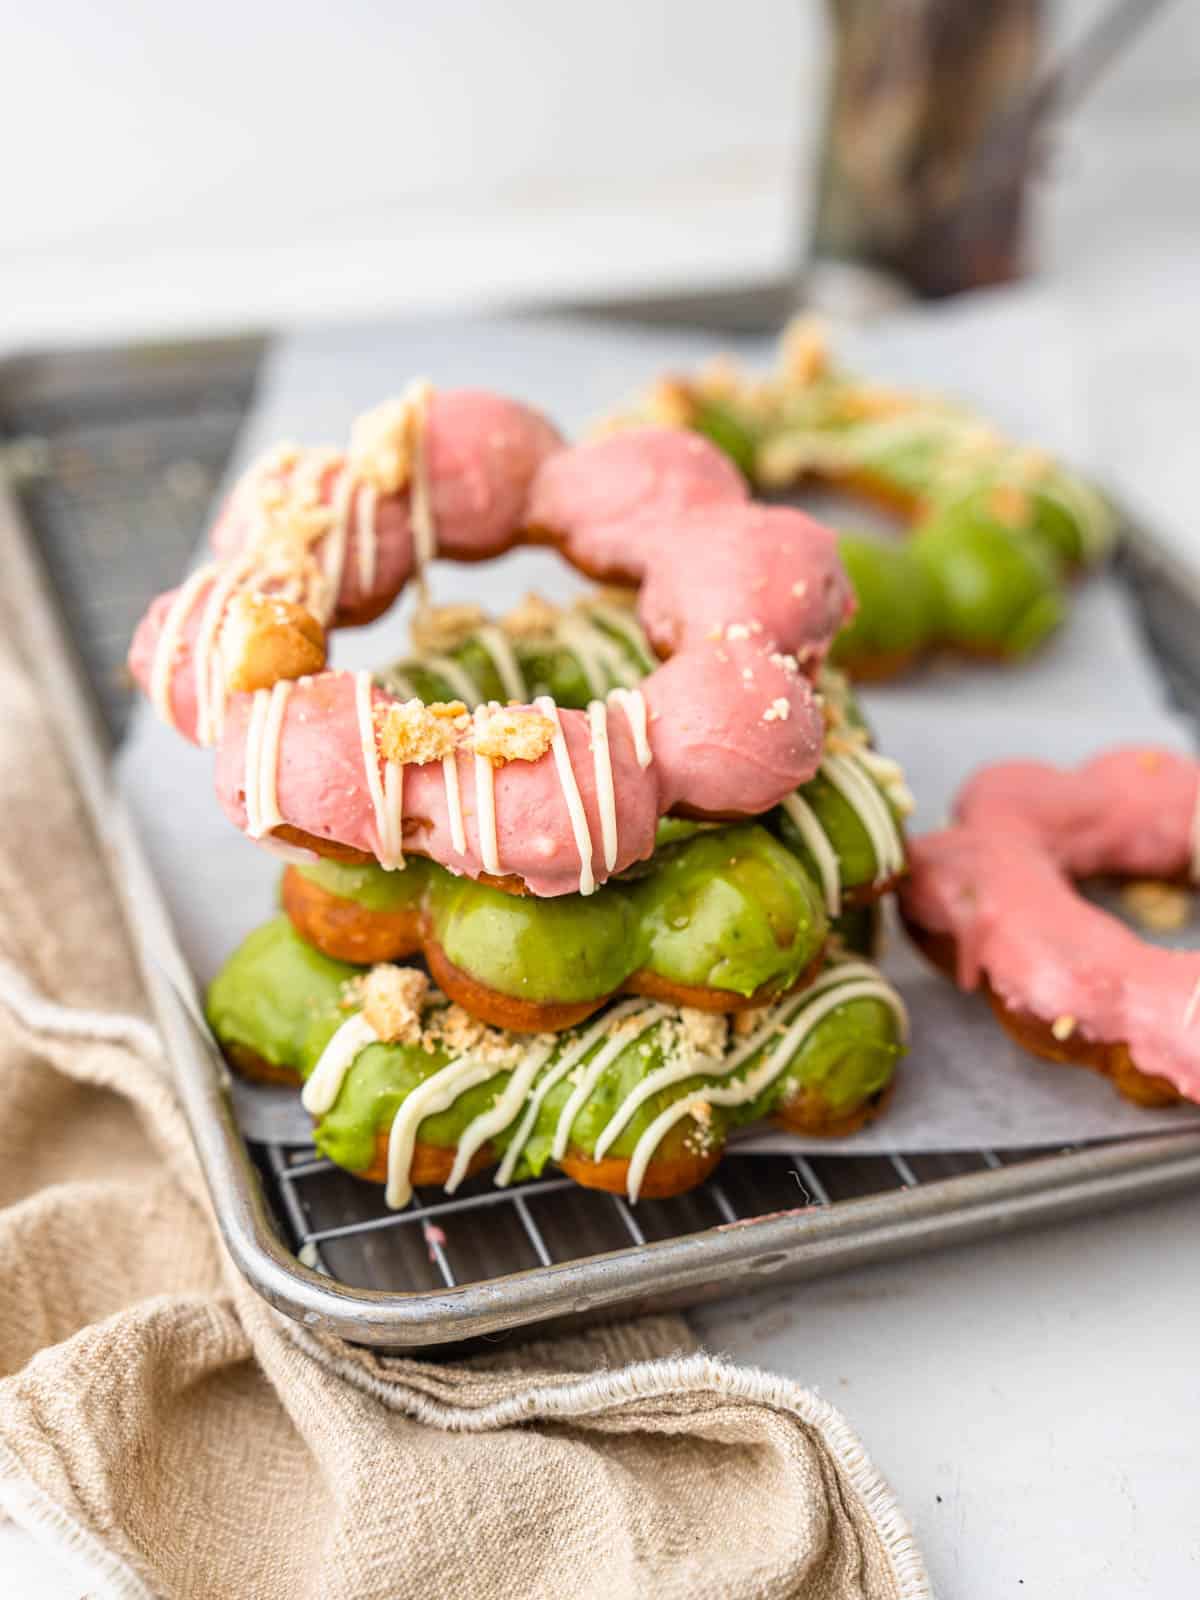 fried mochi donuts frosted with matcha and strawberry white chocolate frosting